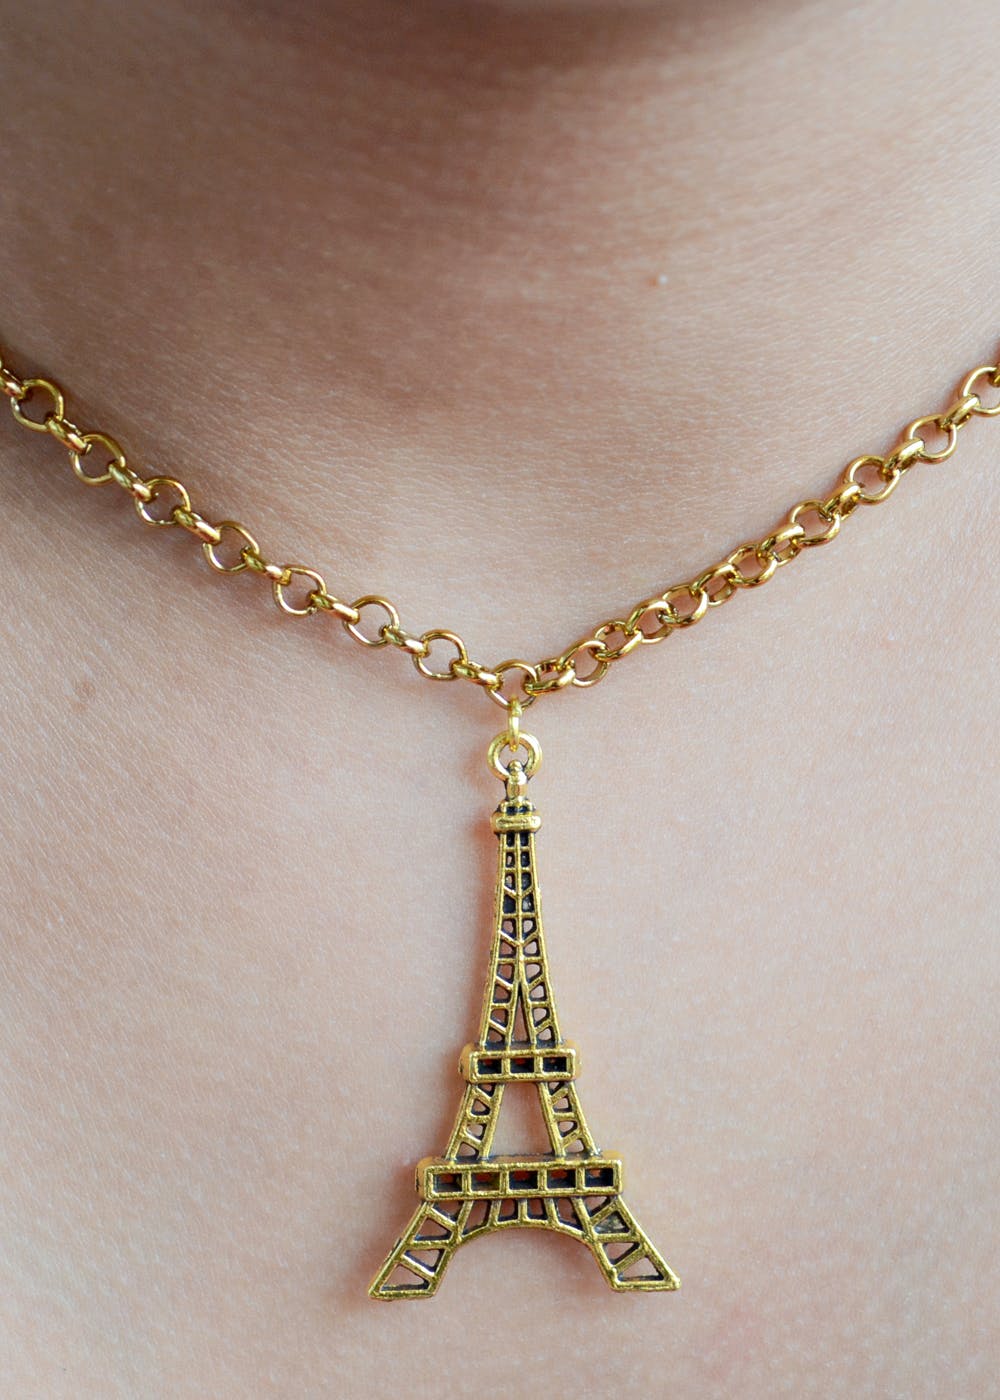 Buy Sullery Black Eiffel Tower Necklace Paris France Locket With Adjustable  Leather Cord Chain Necklace Pendant For Men And Boys Online In India At  Discounted Prices